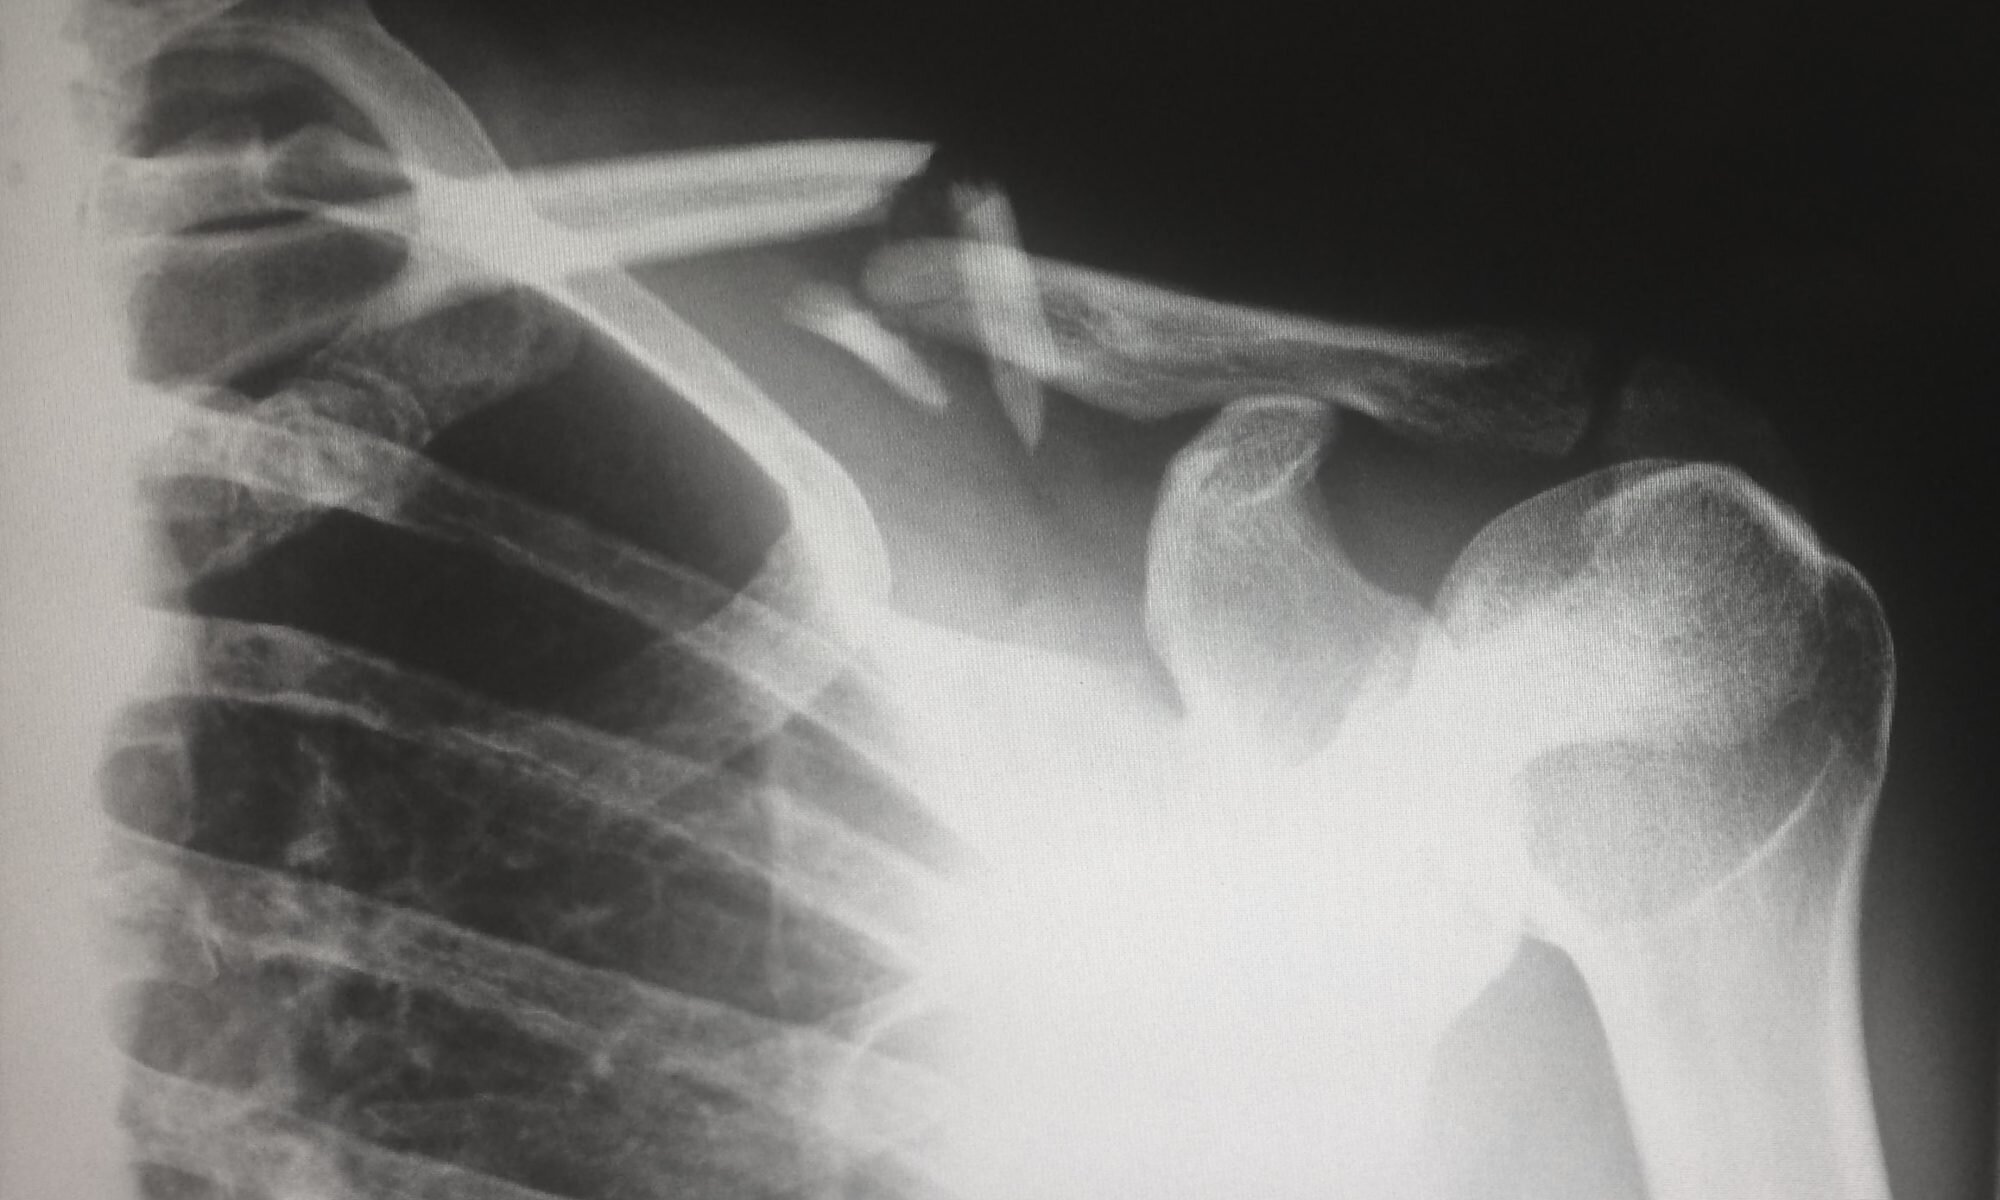 xray image showing a broken clavicle